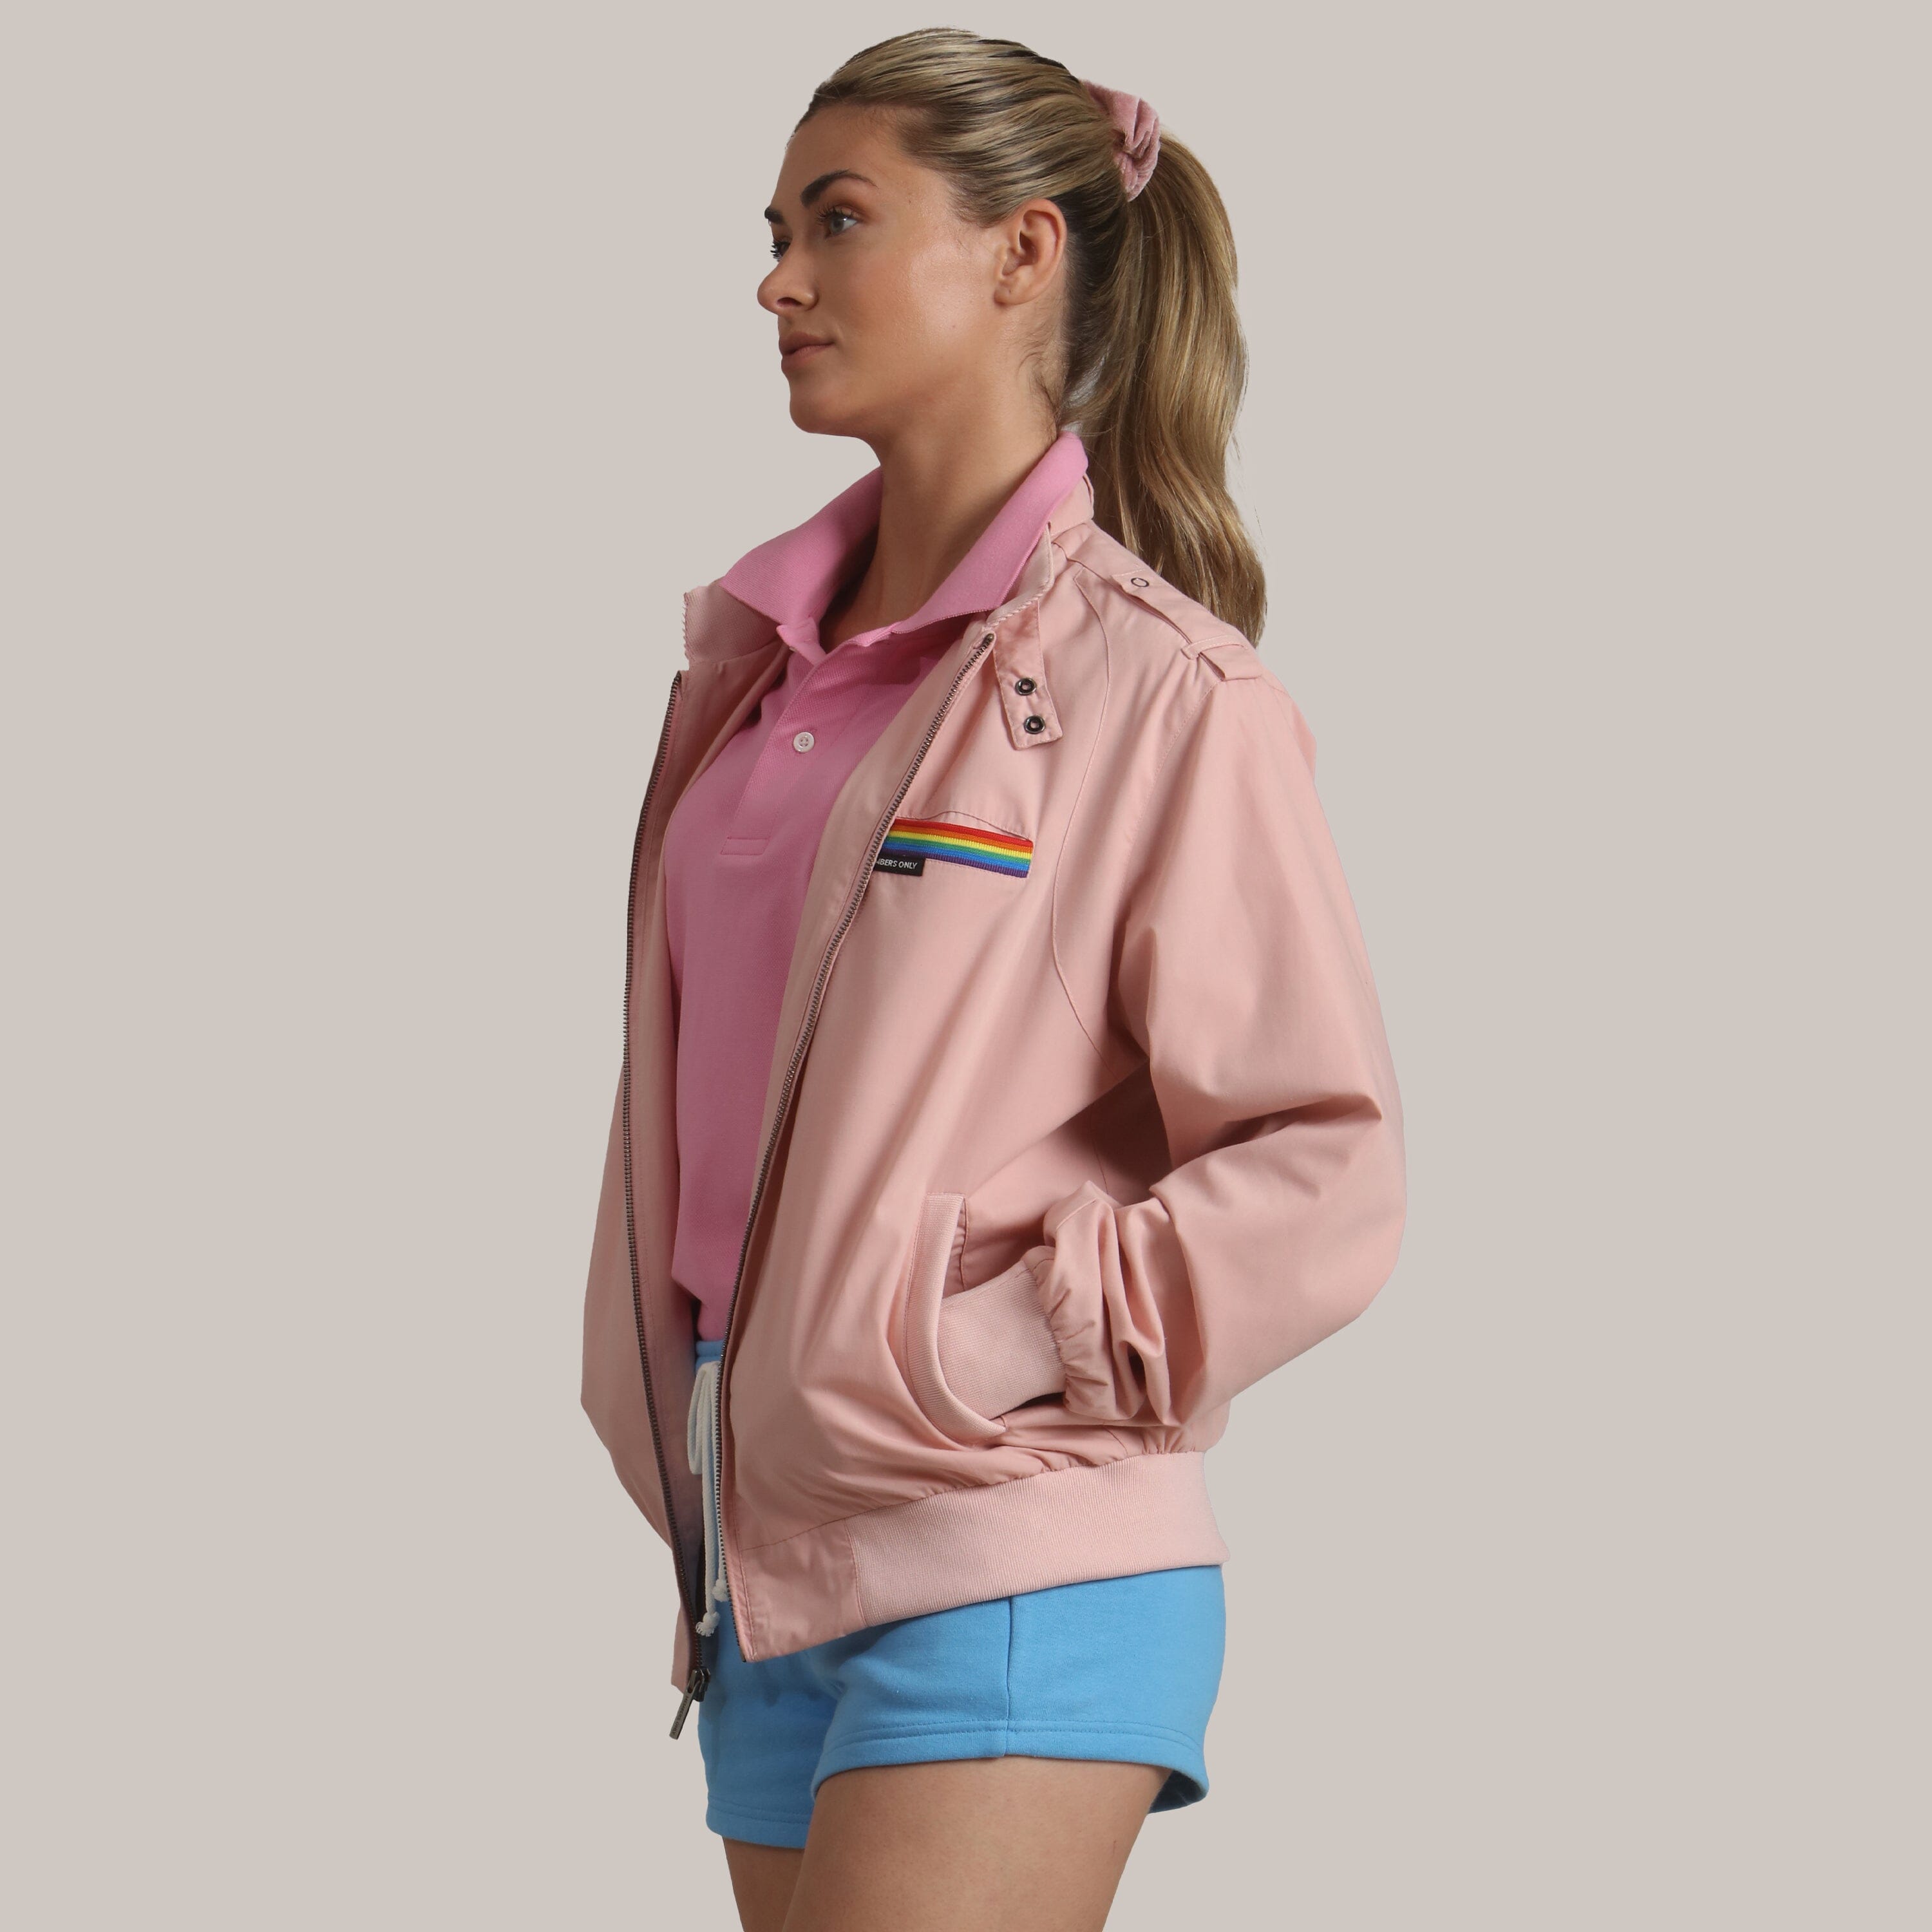 Members Only Members Only Oversized Pride Jacket - Light Pink - X